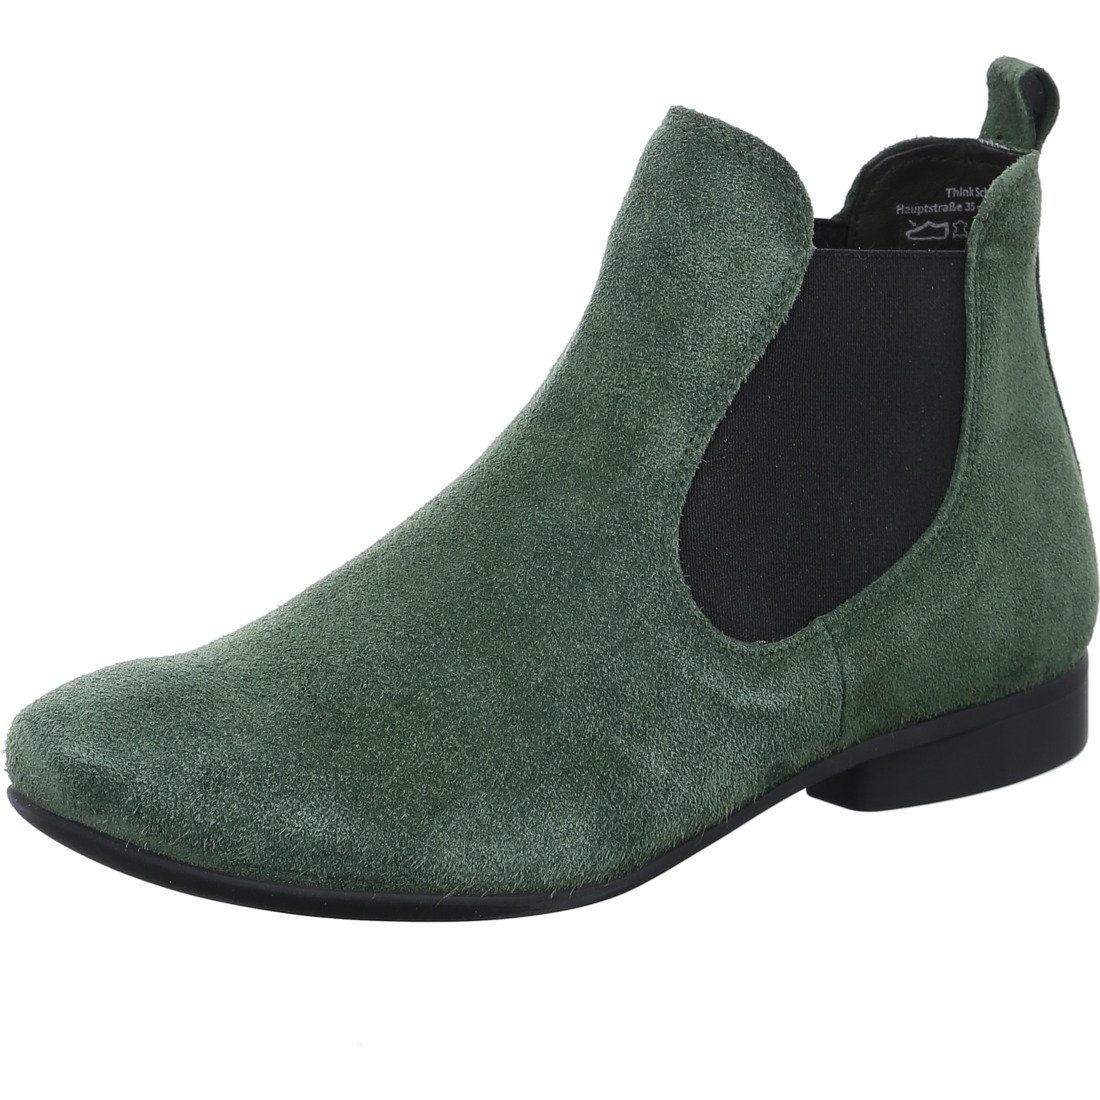 Think! Think! Schuhe, Stiefelette Guad 2 - Velours Stiefelette grün 049965 | Ankle Boots